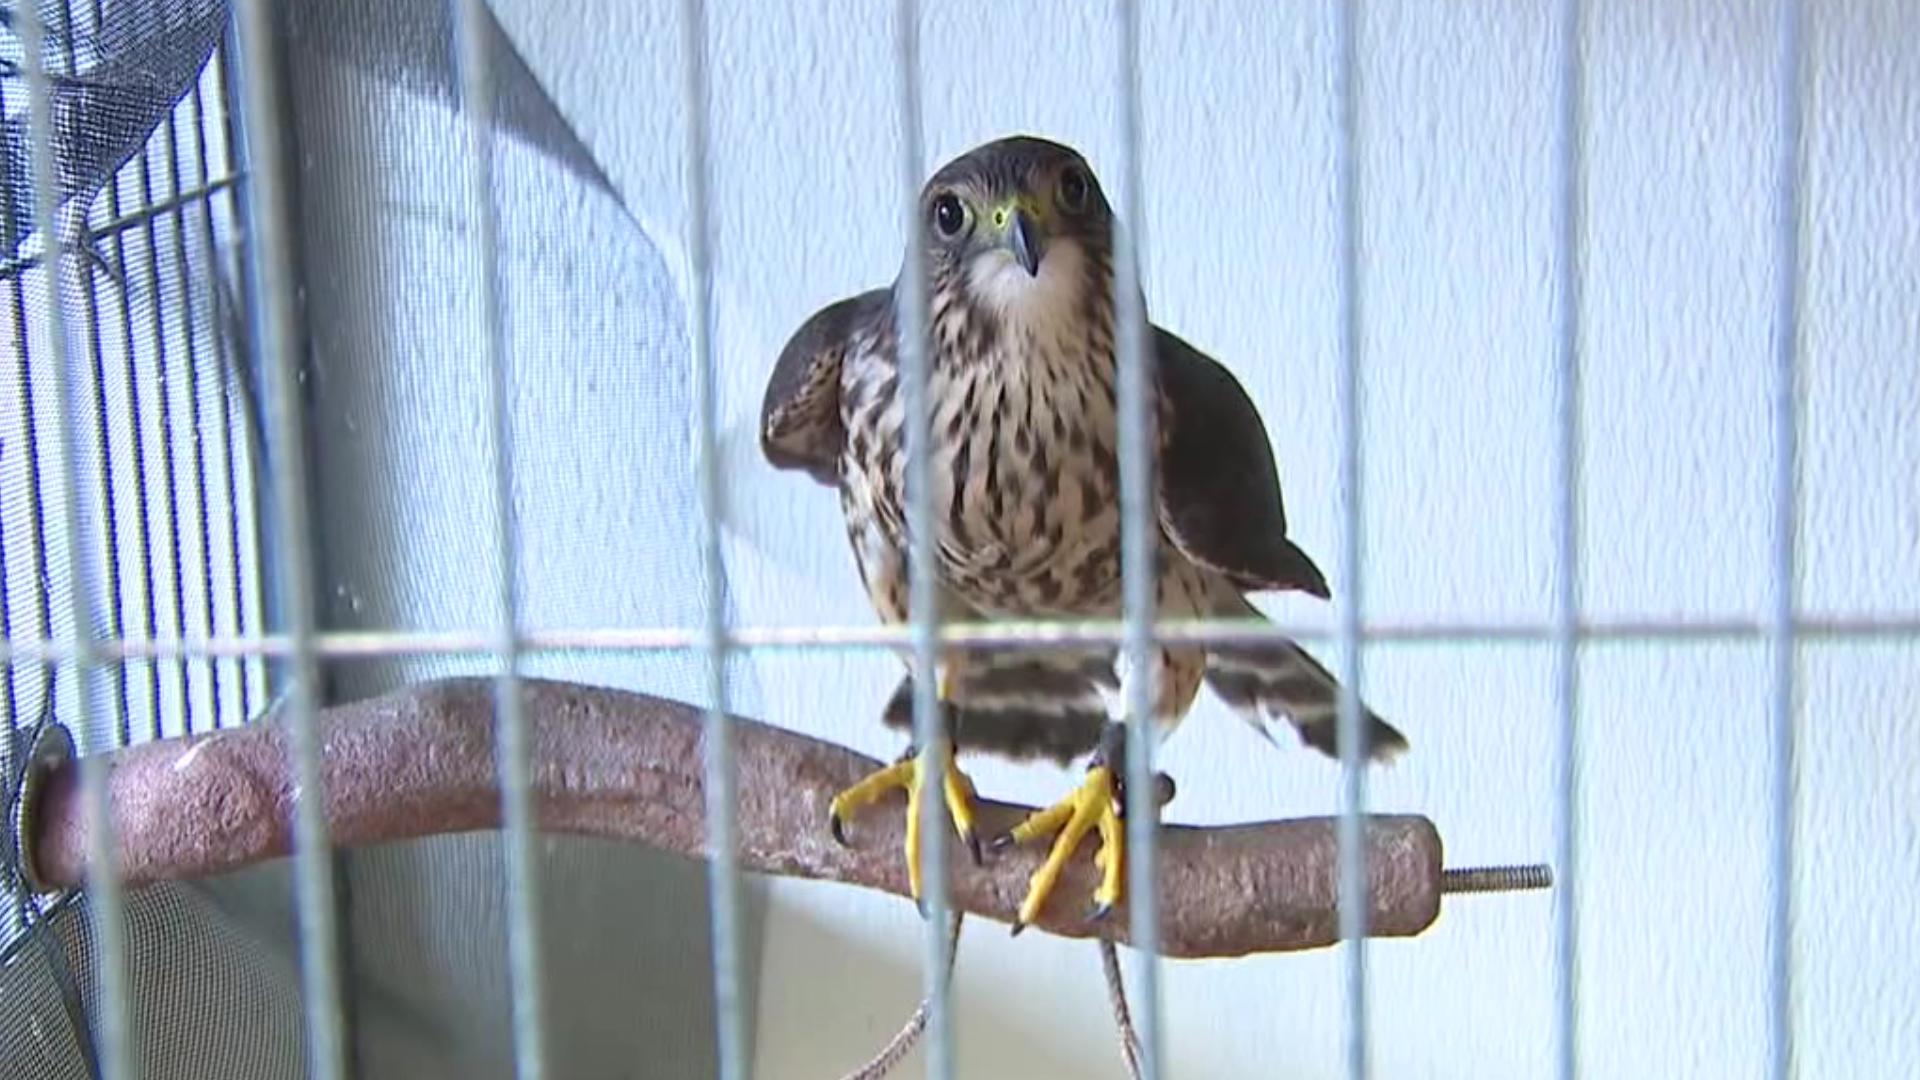 A wildlife rehabilitation center in Monroe County says this is already its busiest time of year and now it faces a surprise project.